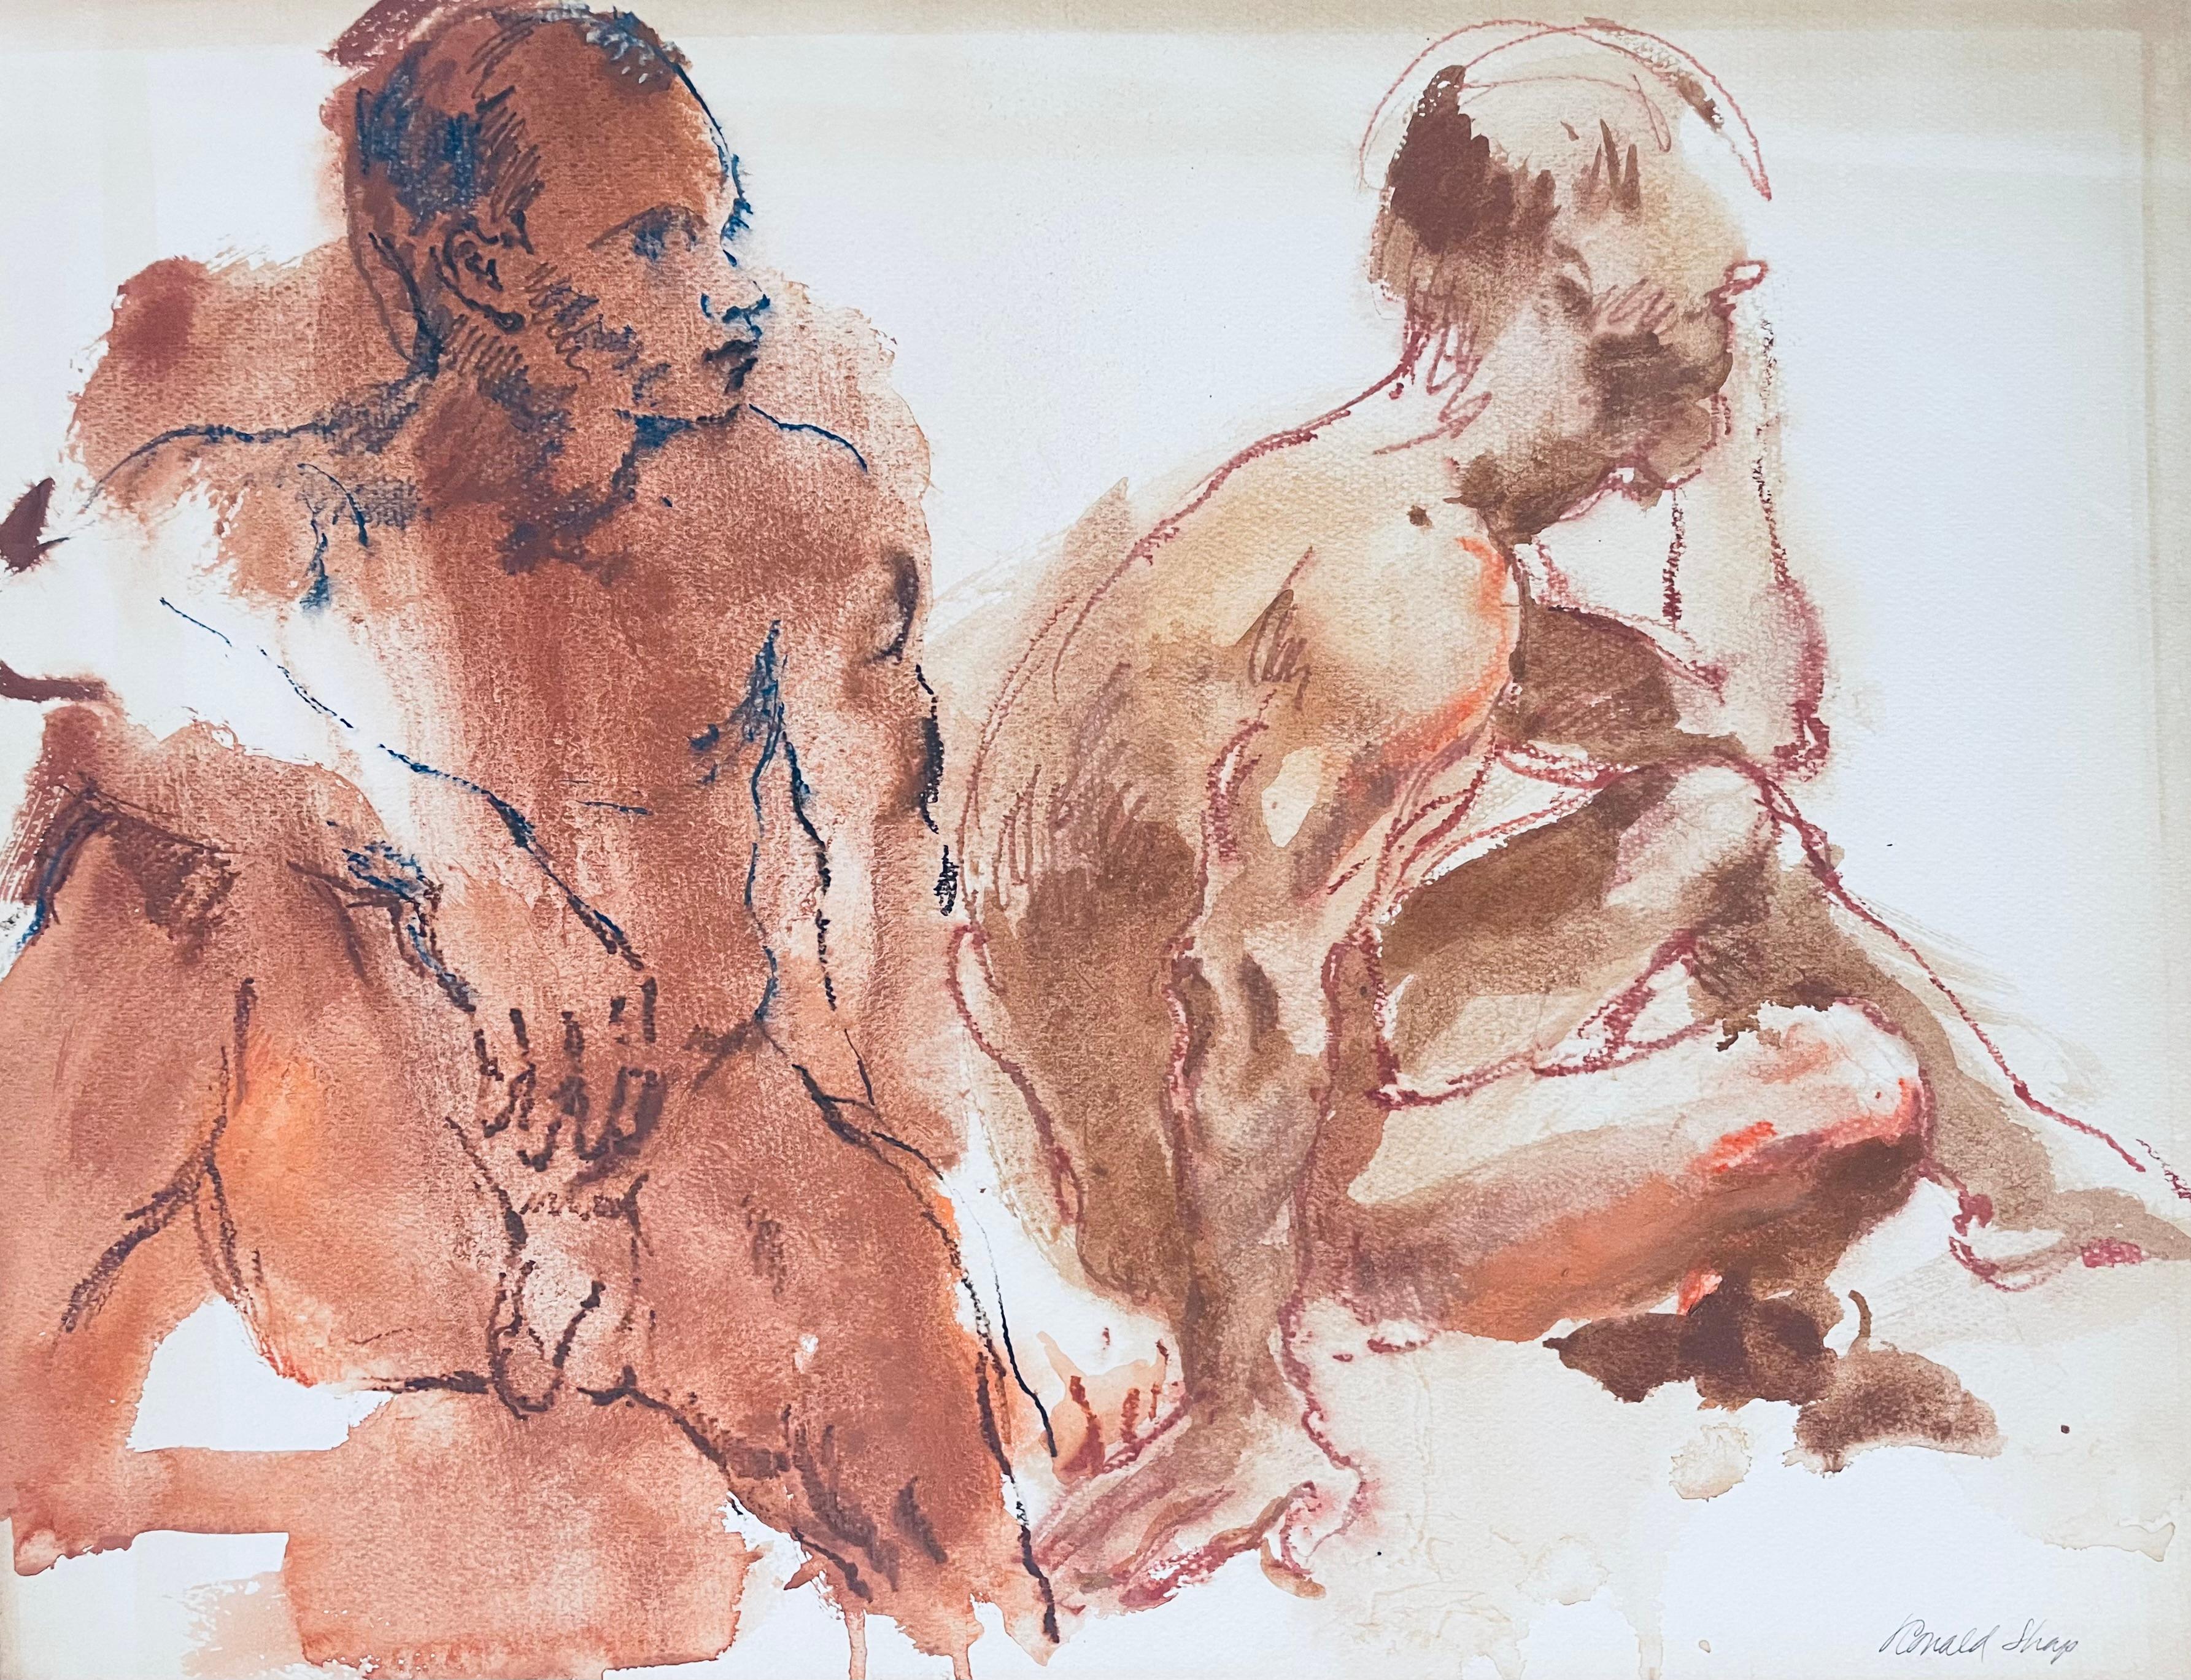 Original oil pastel and gouache figure drawing by celebrated, twentieth-century California landscape painter, Ronald Shap. Sketch of two nude men in washes of brown with electric blue, red and orange oil pastel accents. 24x18 inches. Signed. 

This